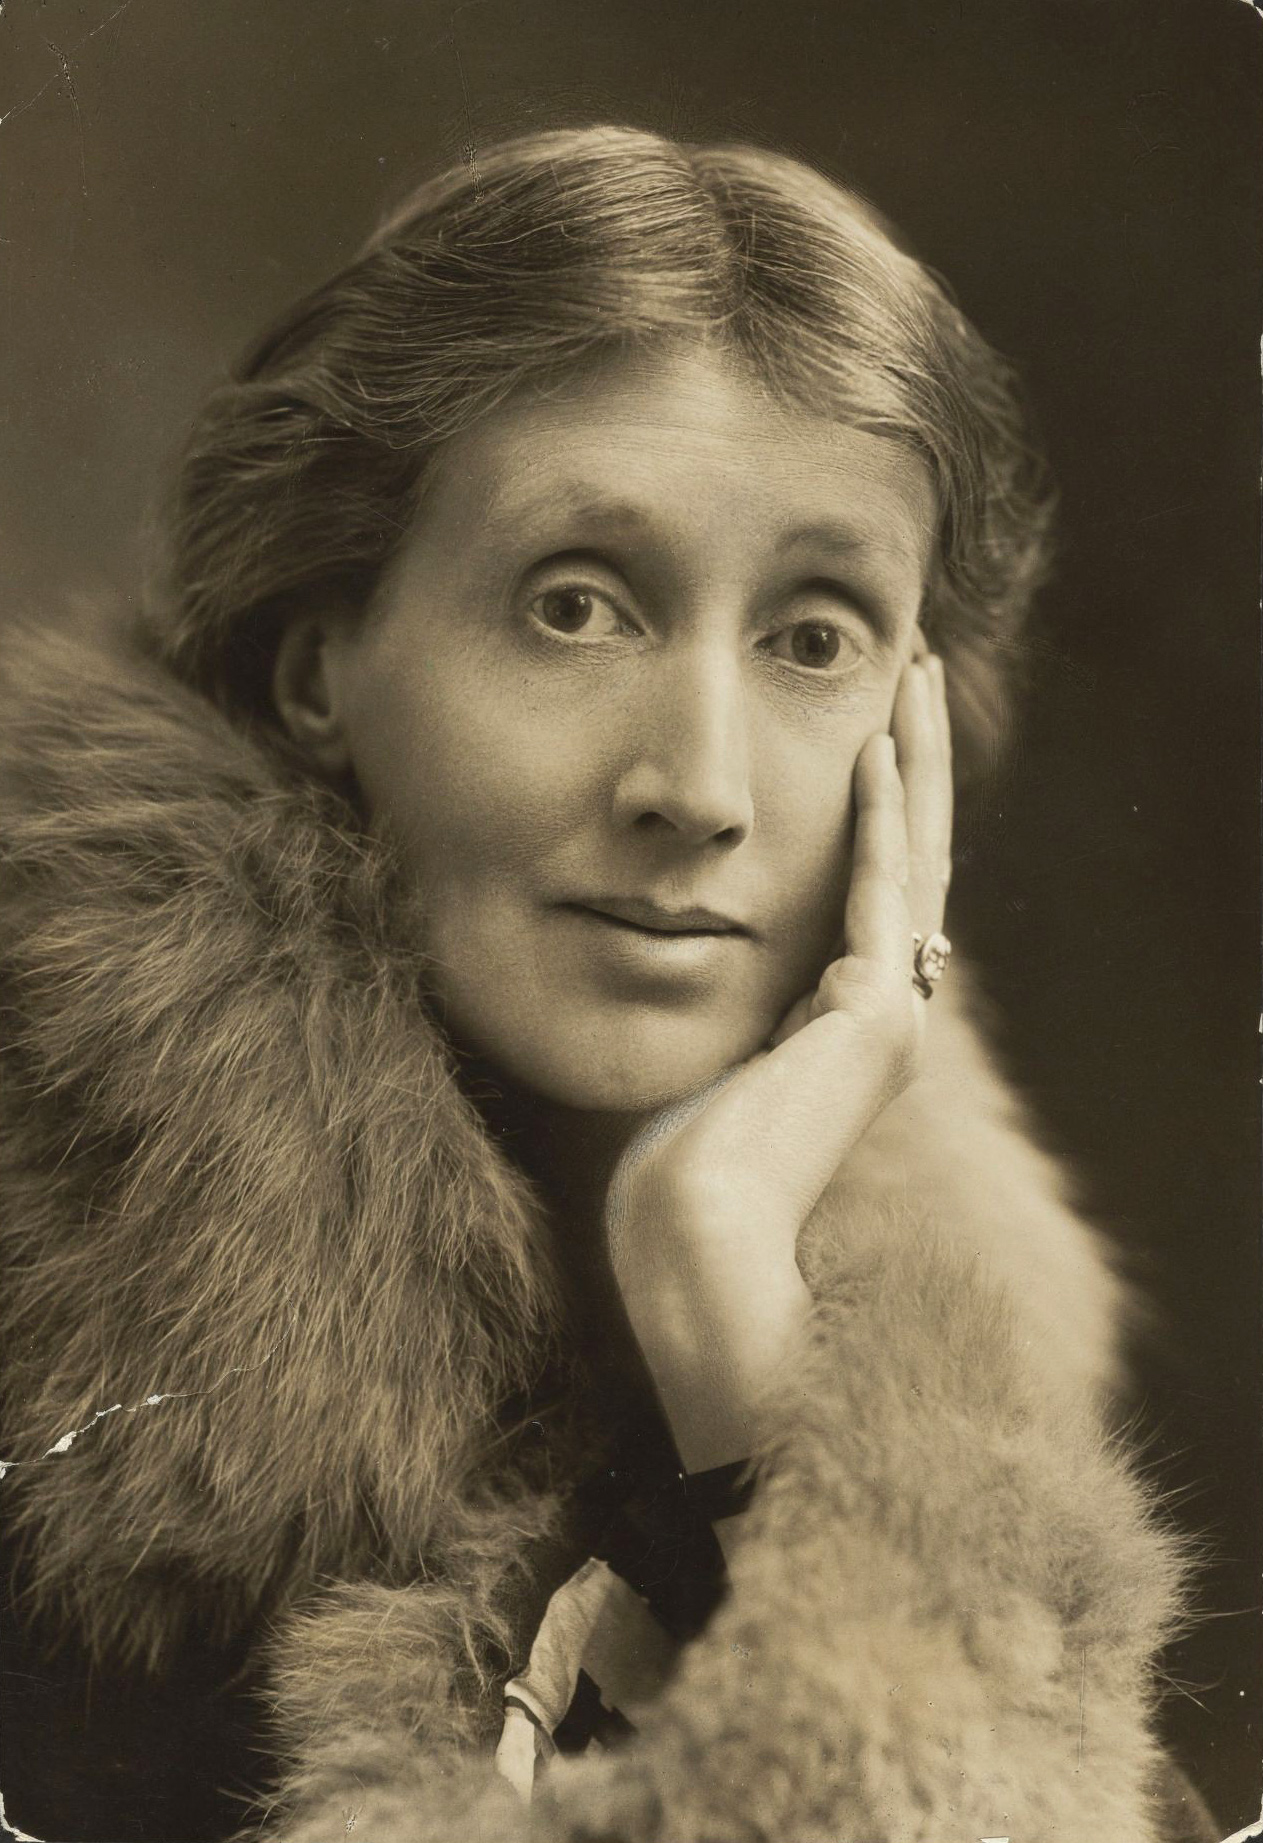 Virginia Woolf's Legacy of Gender Equality and Activism – Trinity